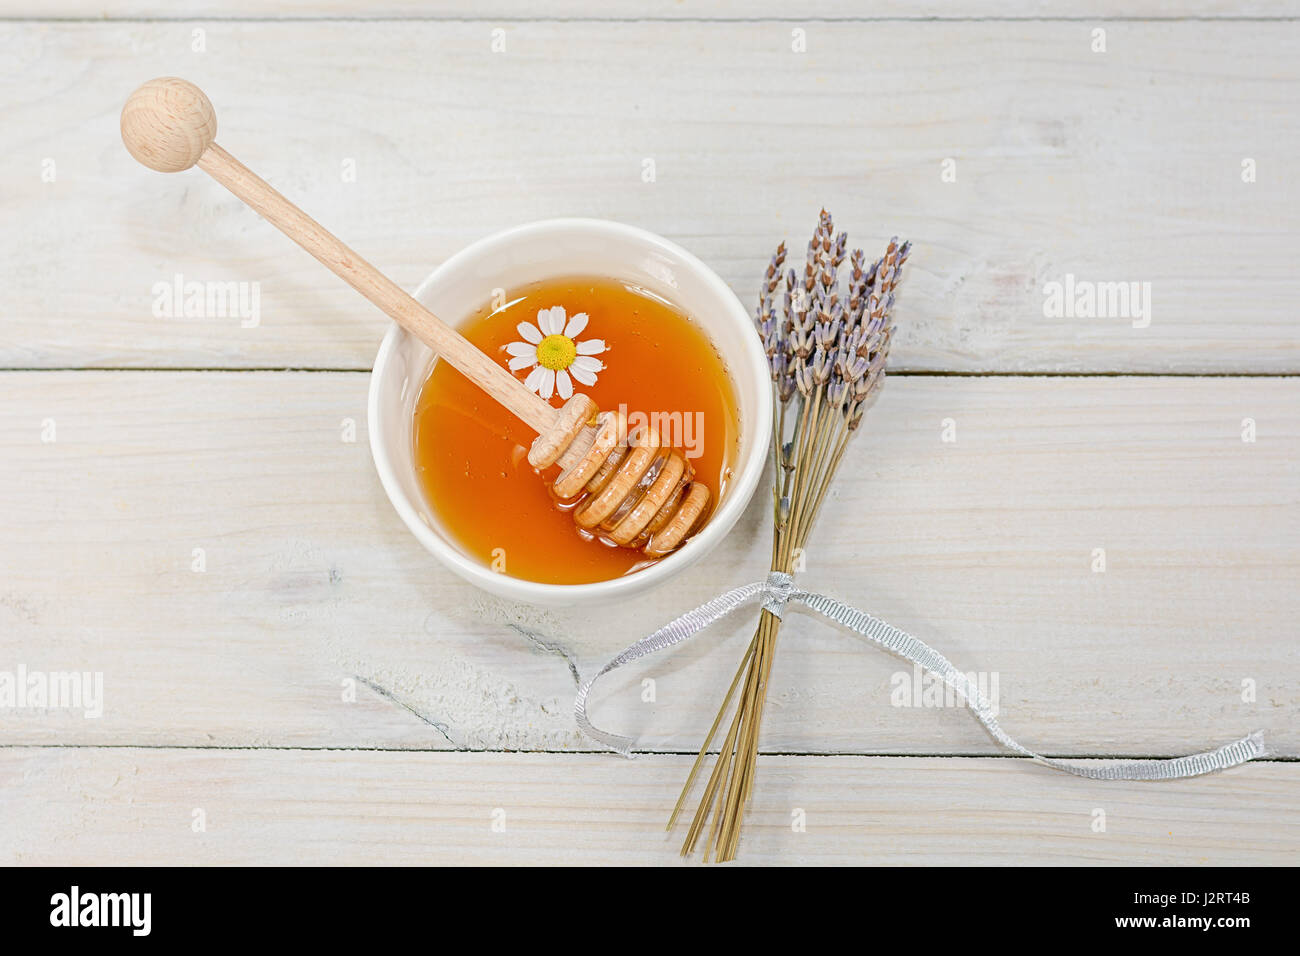 Bowl filled with flower honey with chamomile flower, decorated with a dried lavender bouquet Stock Photo